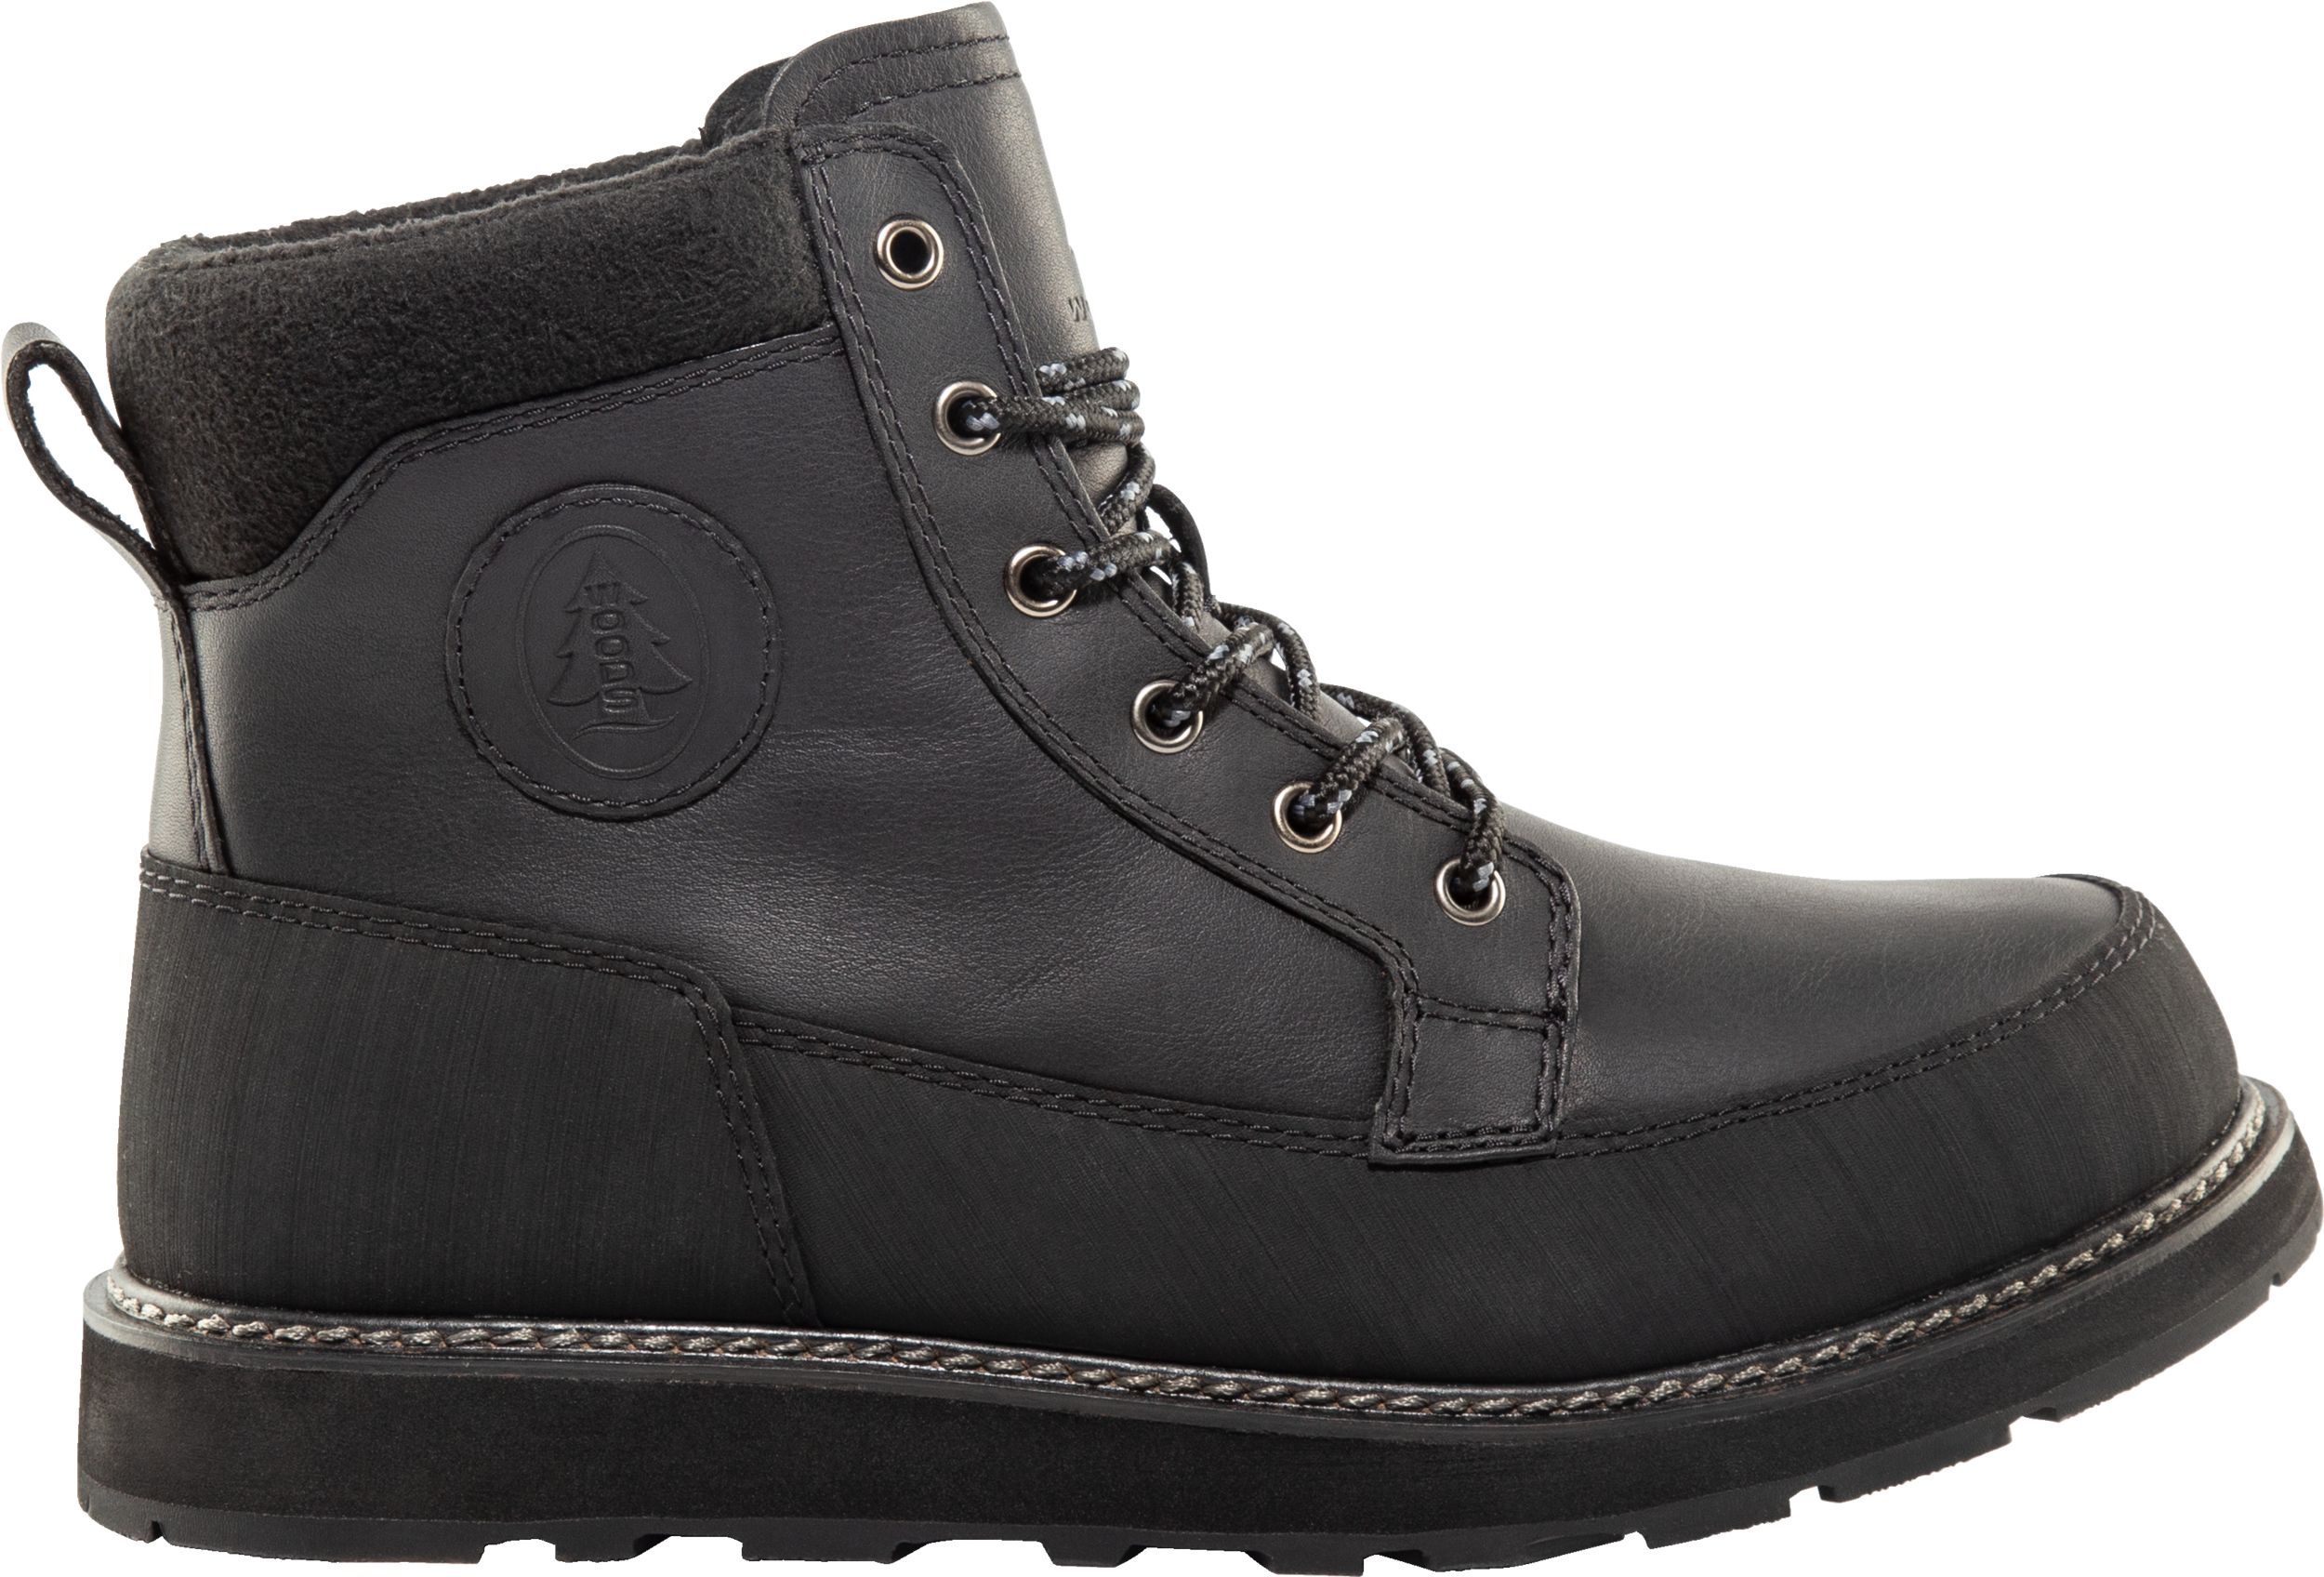 Woods Men's Robson Lace Up Boots